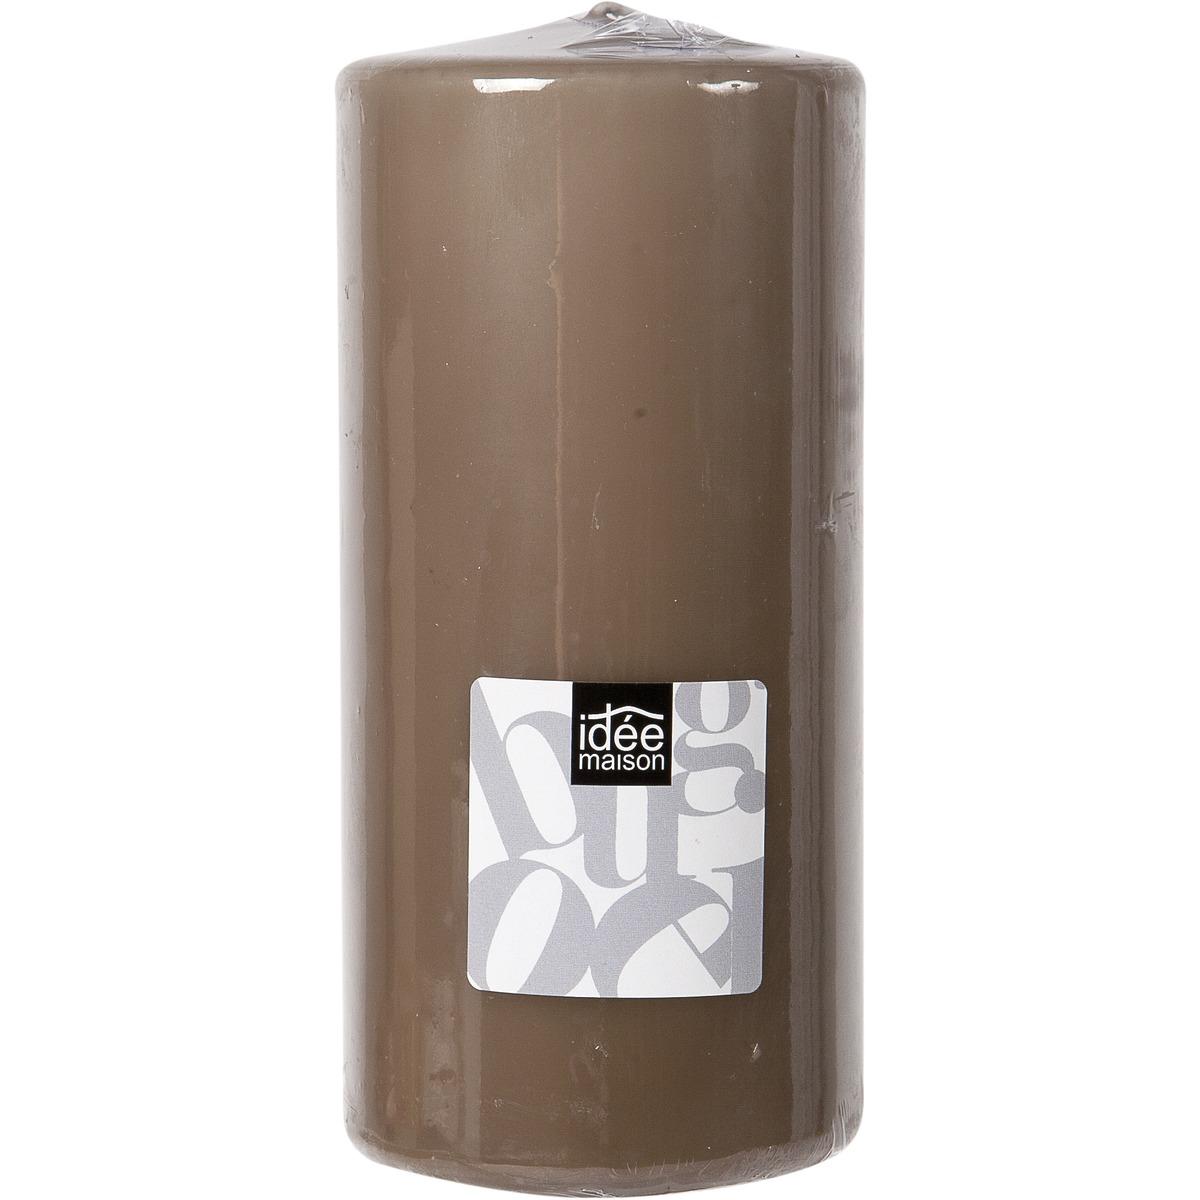 Bougie cylindrique grand format - 7 x 15 cm - Marron taupe